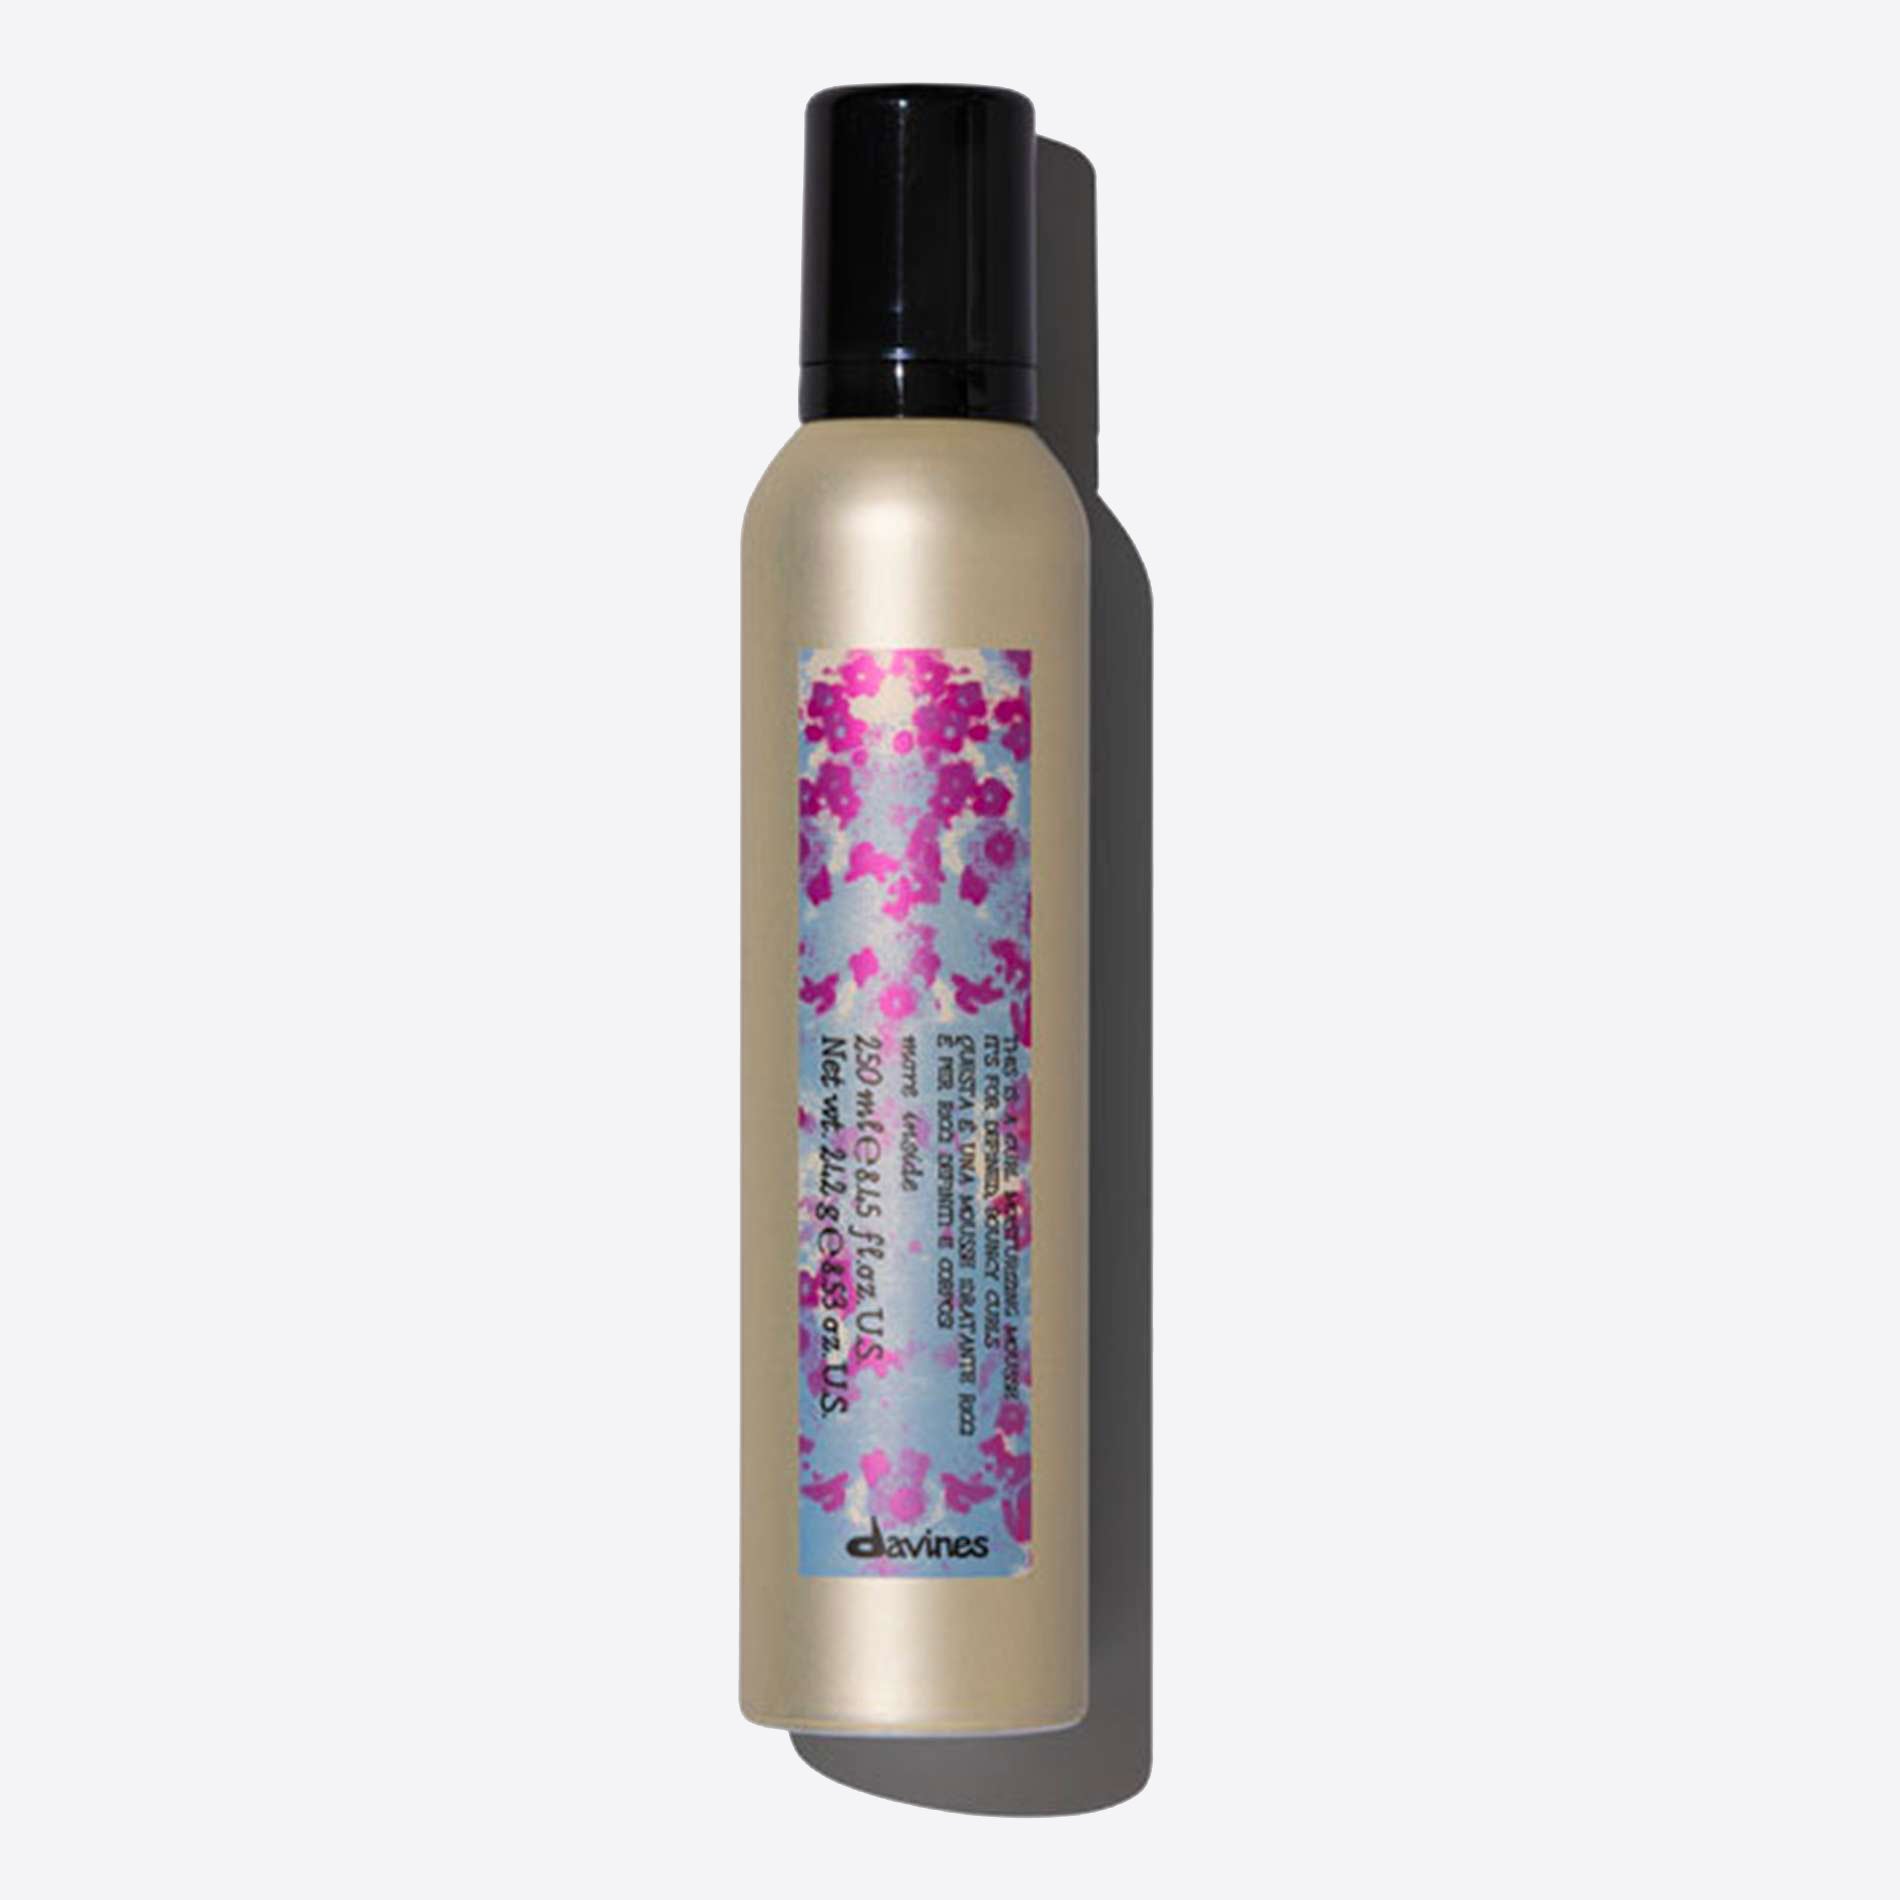 Pianka This is a Curl Moisturizing Mousse